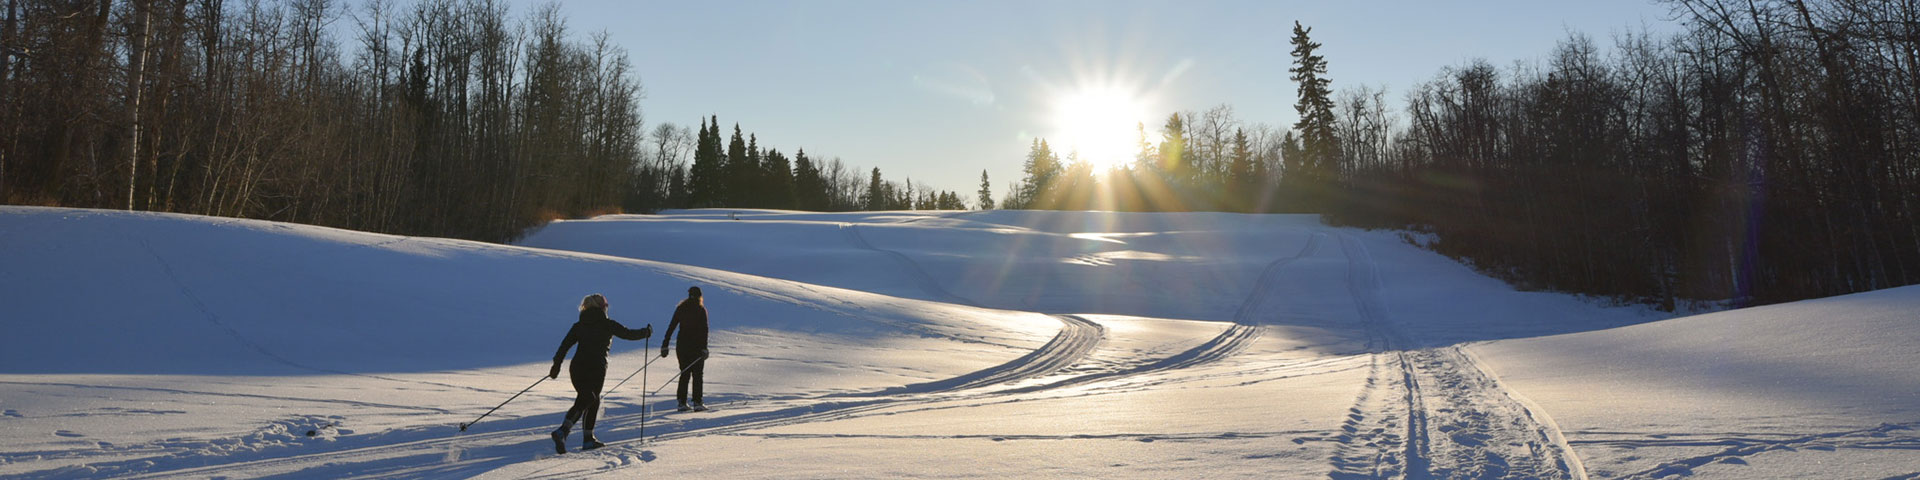 A cross country skier travels downhill on a groomed track as the sun begins to set at the end of a winter day.